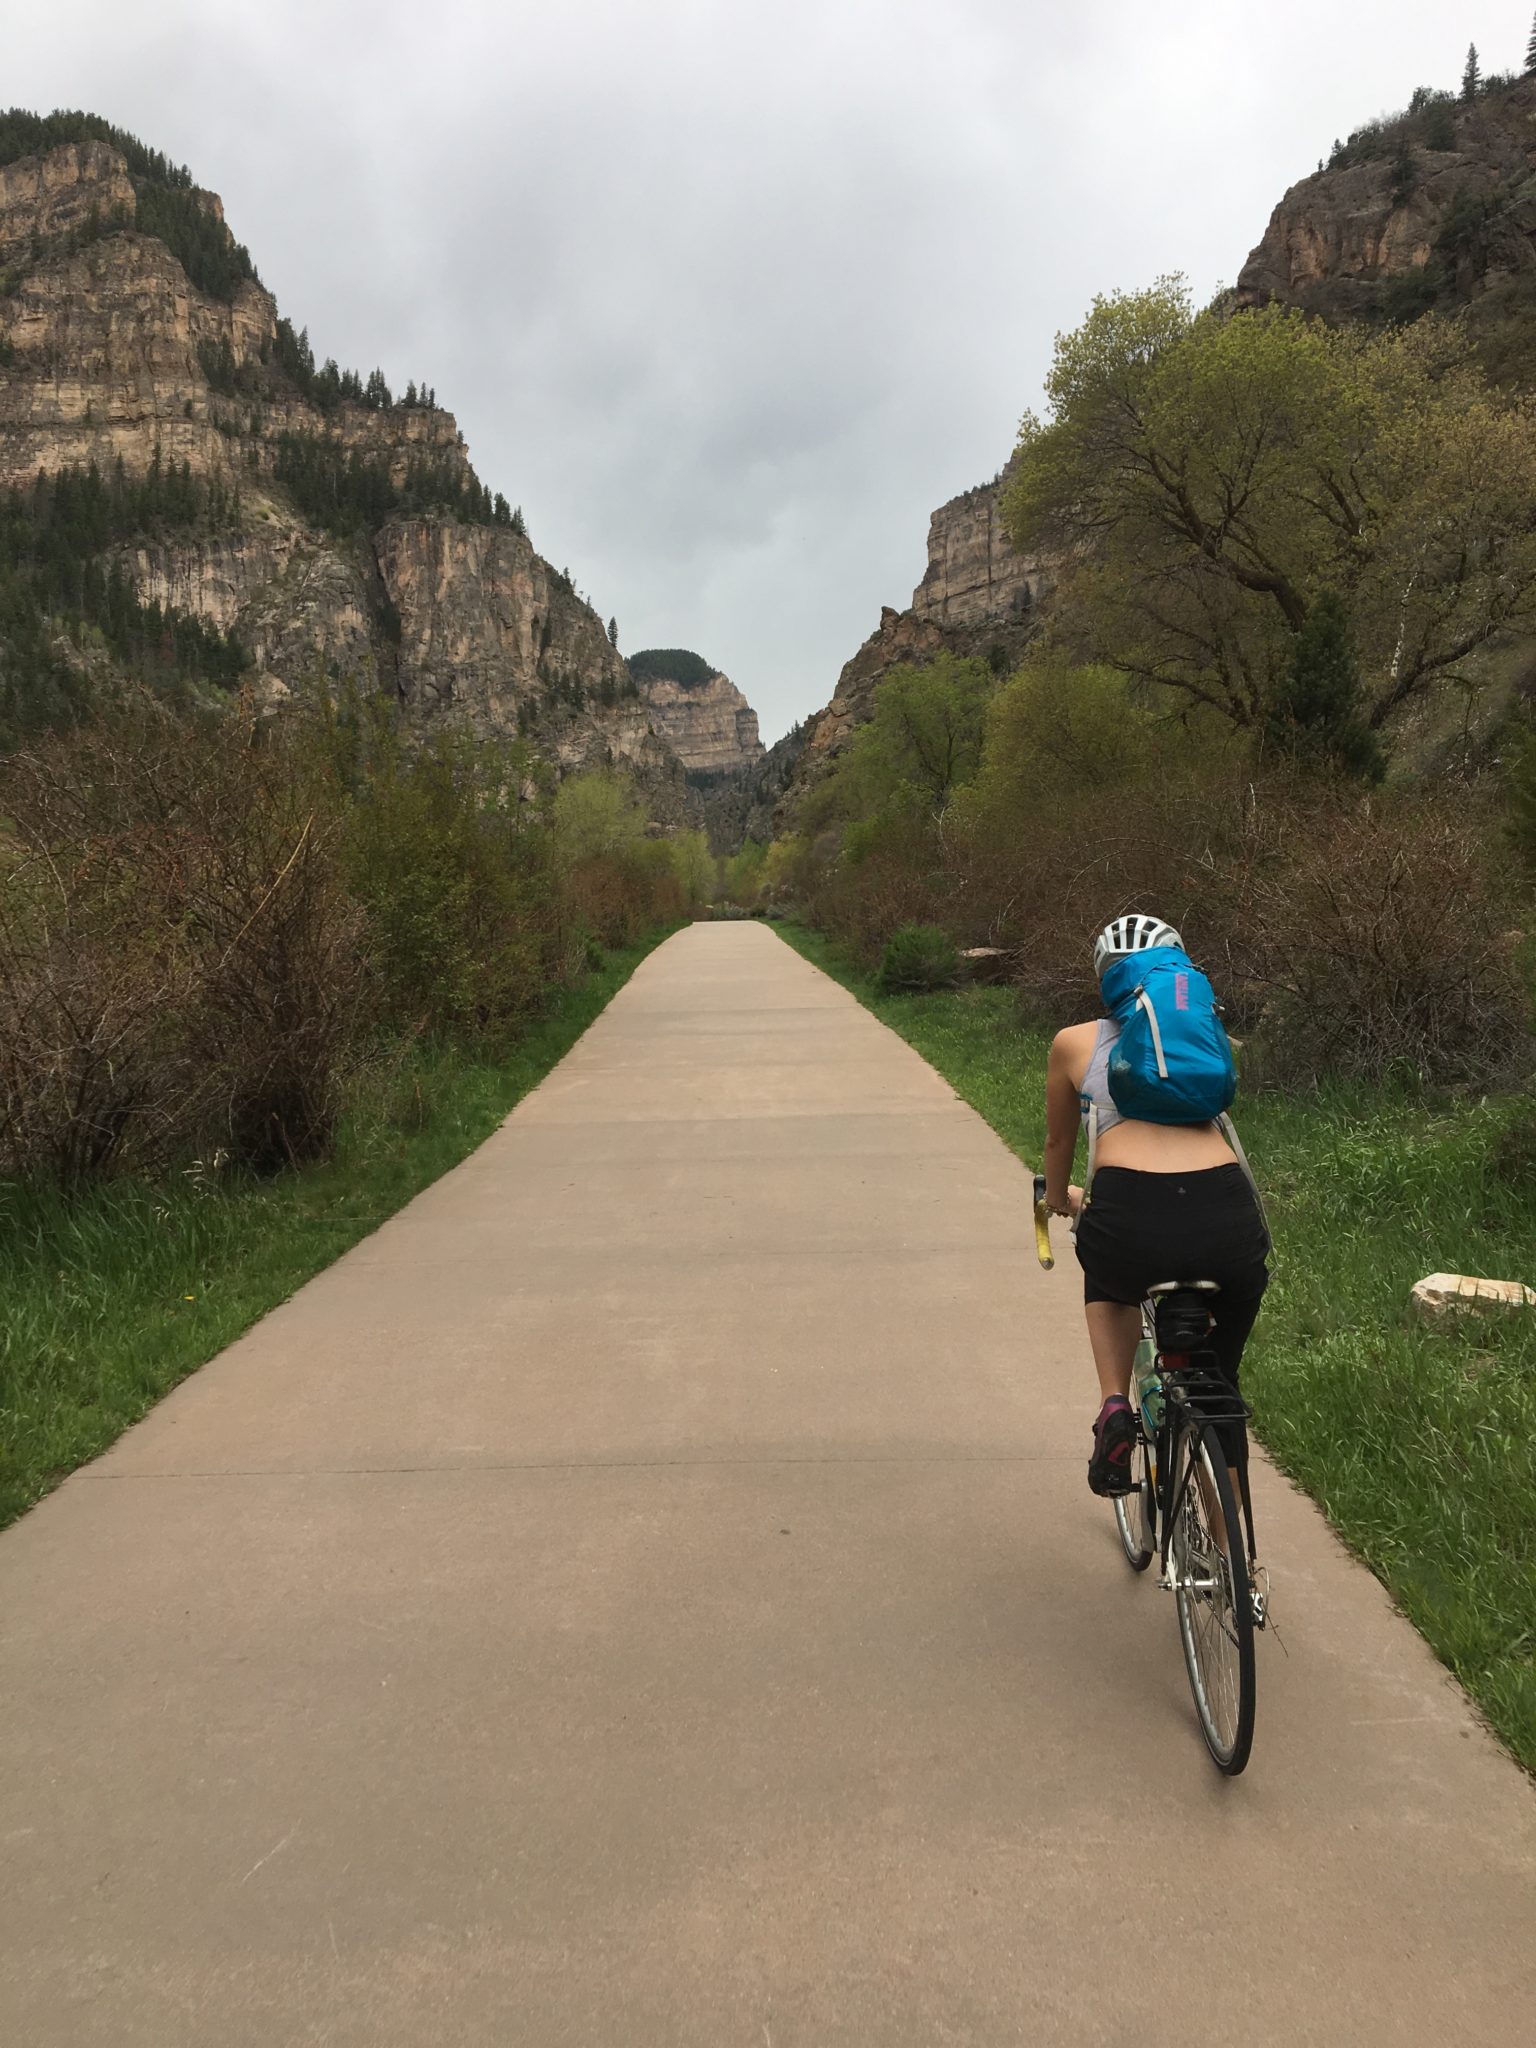 A person riding a bike on a paved trail between tall cliffs.